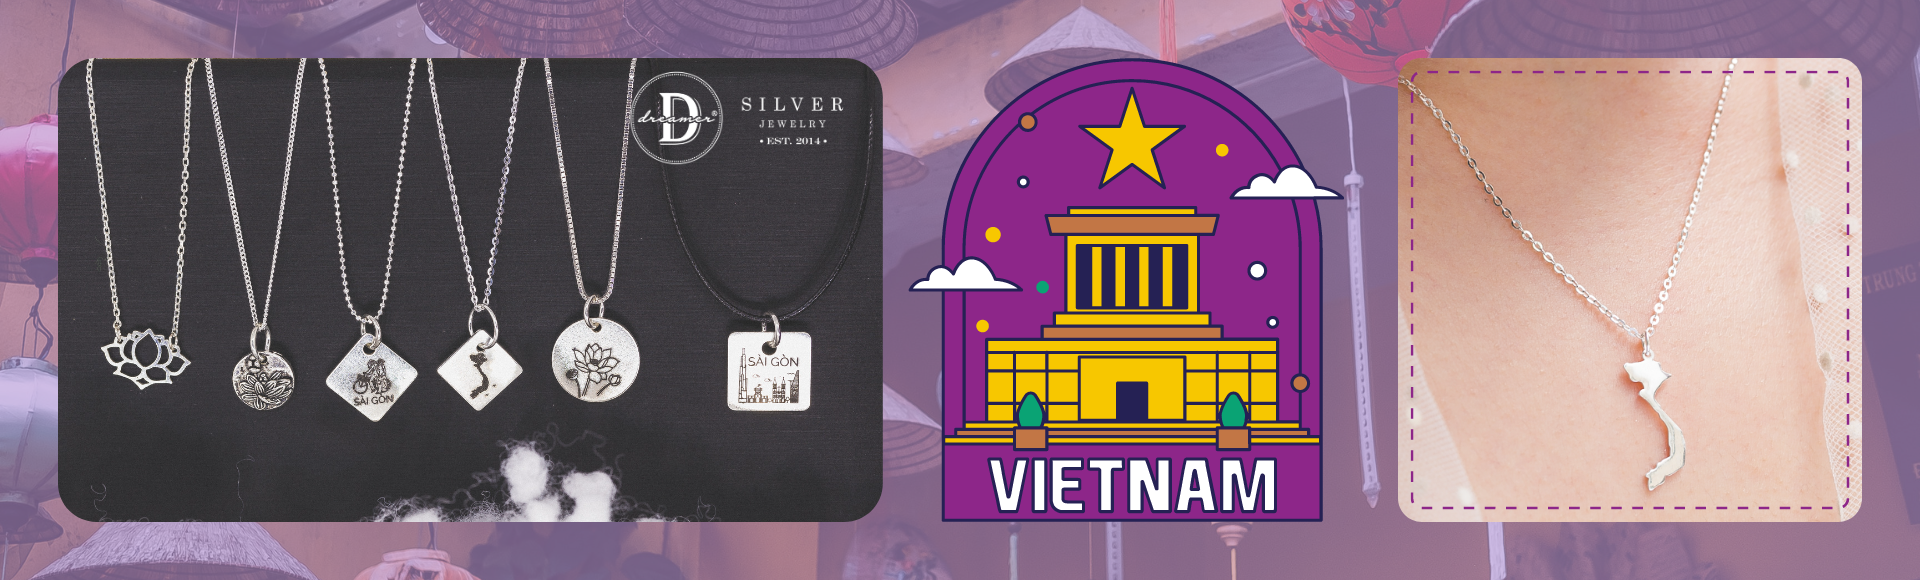 Vietnam Collection - Silver 925 Jewelry About Vietnam